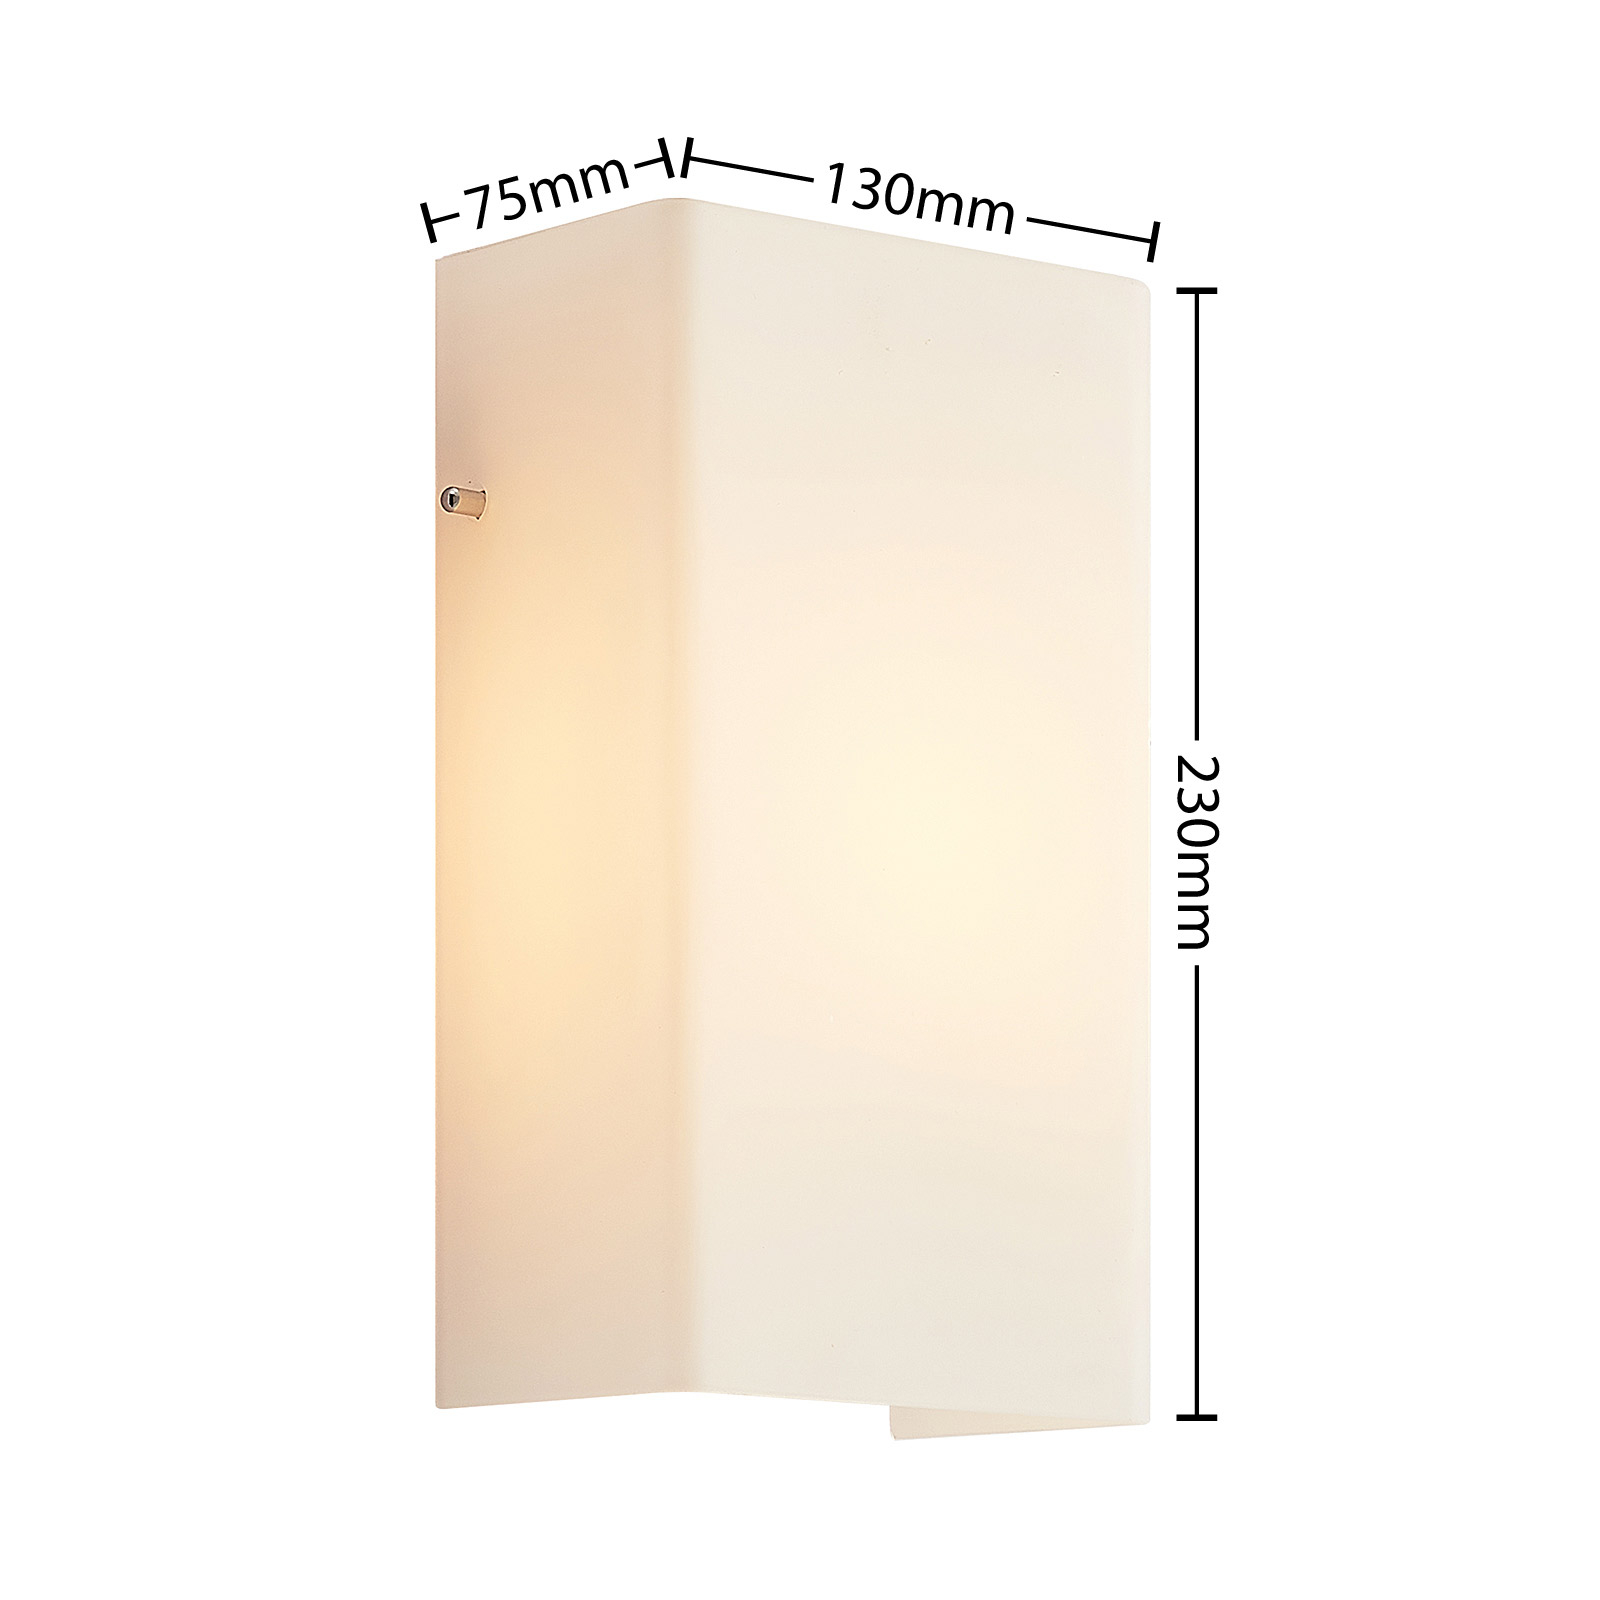 Lucande Nieves wall light, white glass lampshade